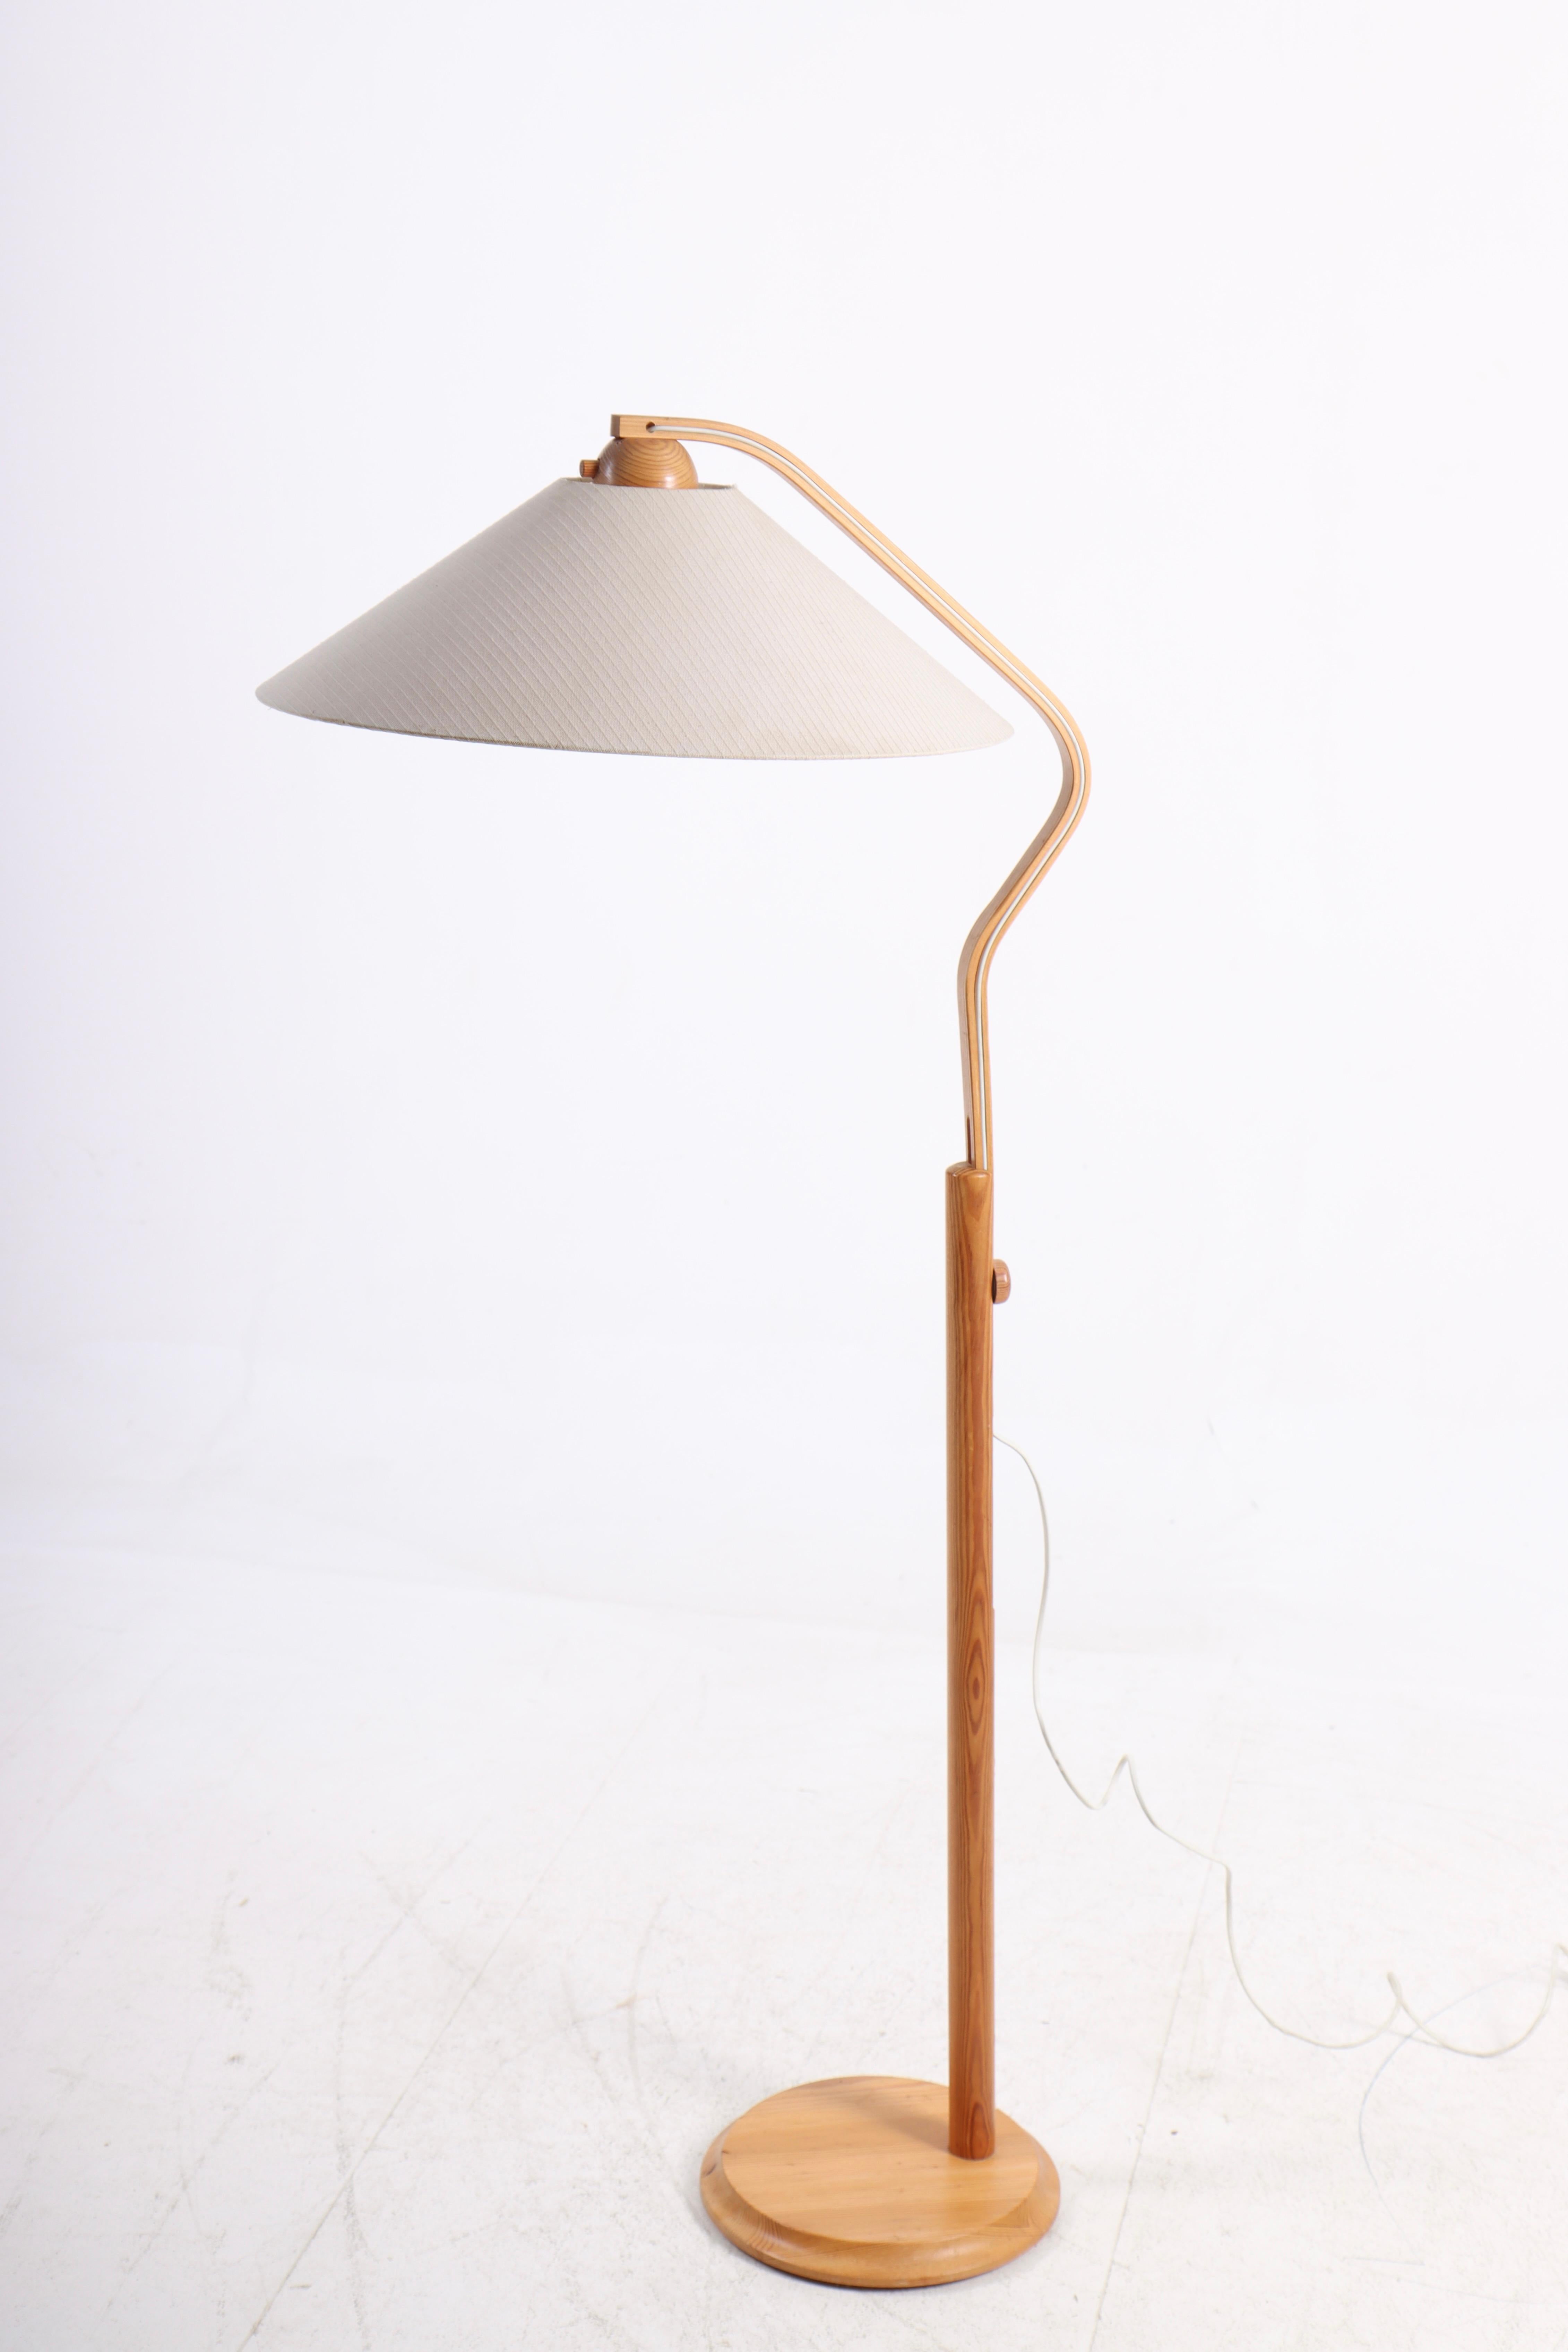 Mid-20th Century Mid-Century Floor Lamp in Pine, Made in Denmark, 1960s For Sale